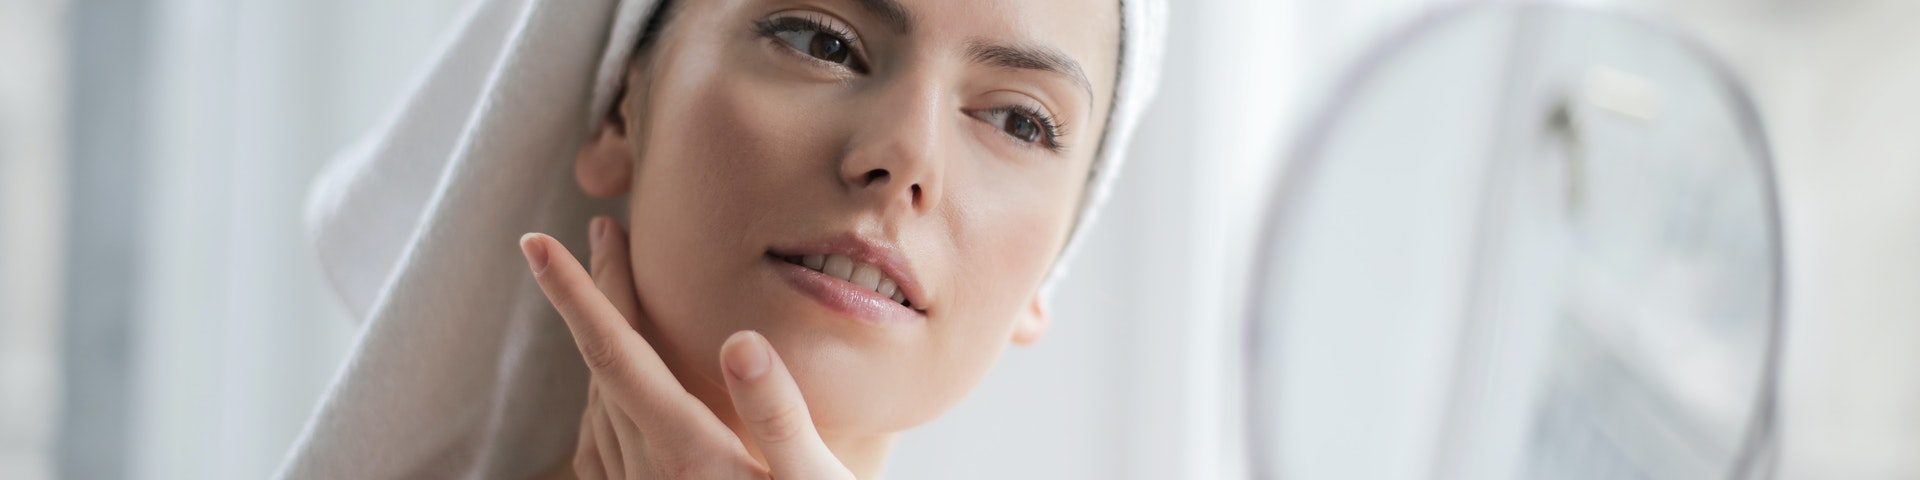 4 Qualities to Look for When Finding New Skincare Products to Try